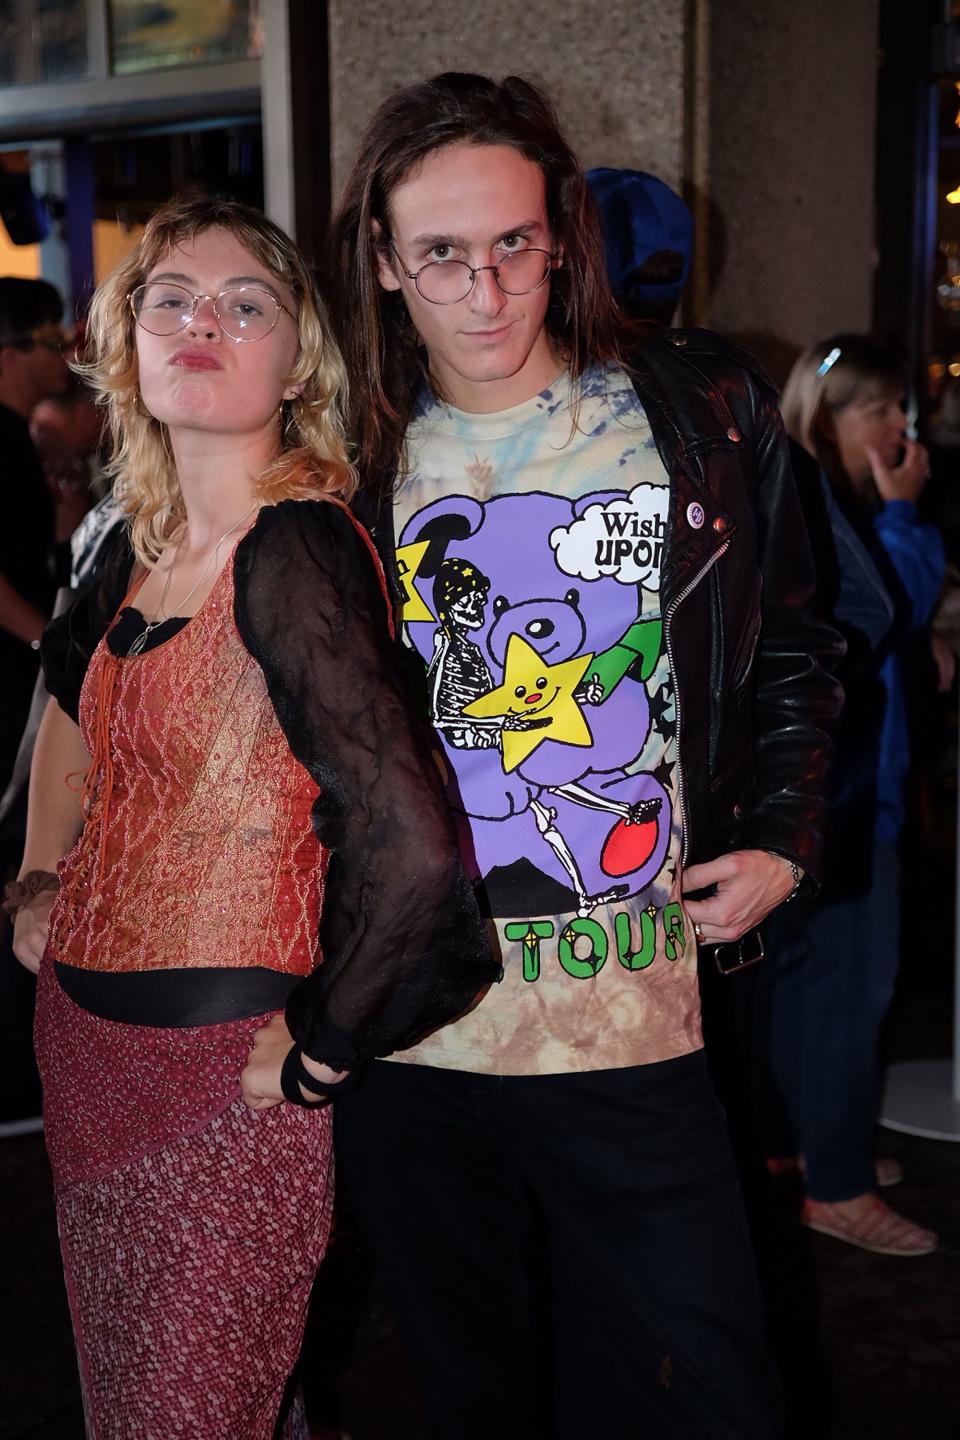 Here’s What Everyone Wore to see Dead & Company on Halloween